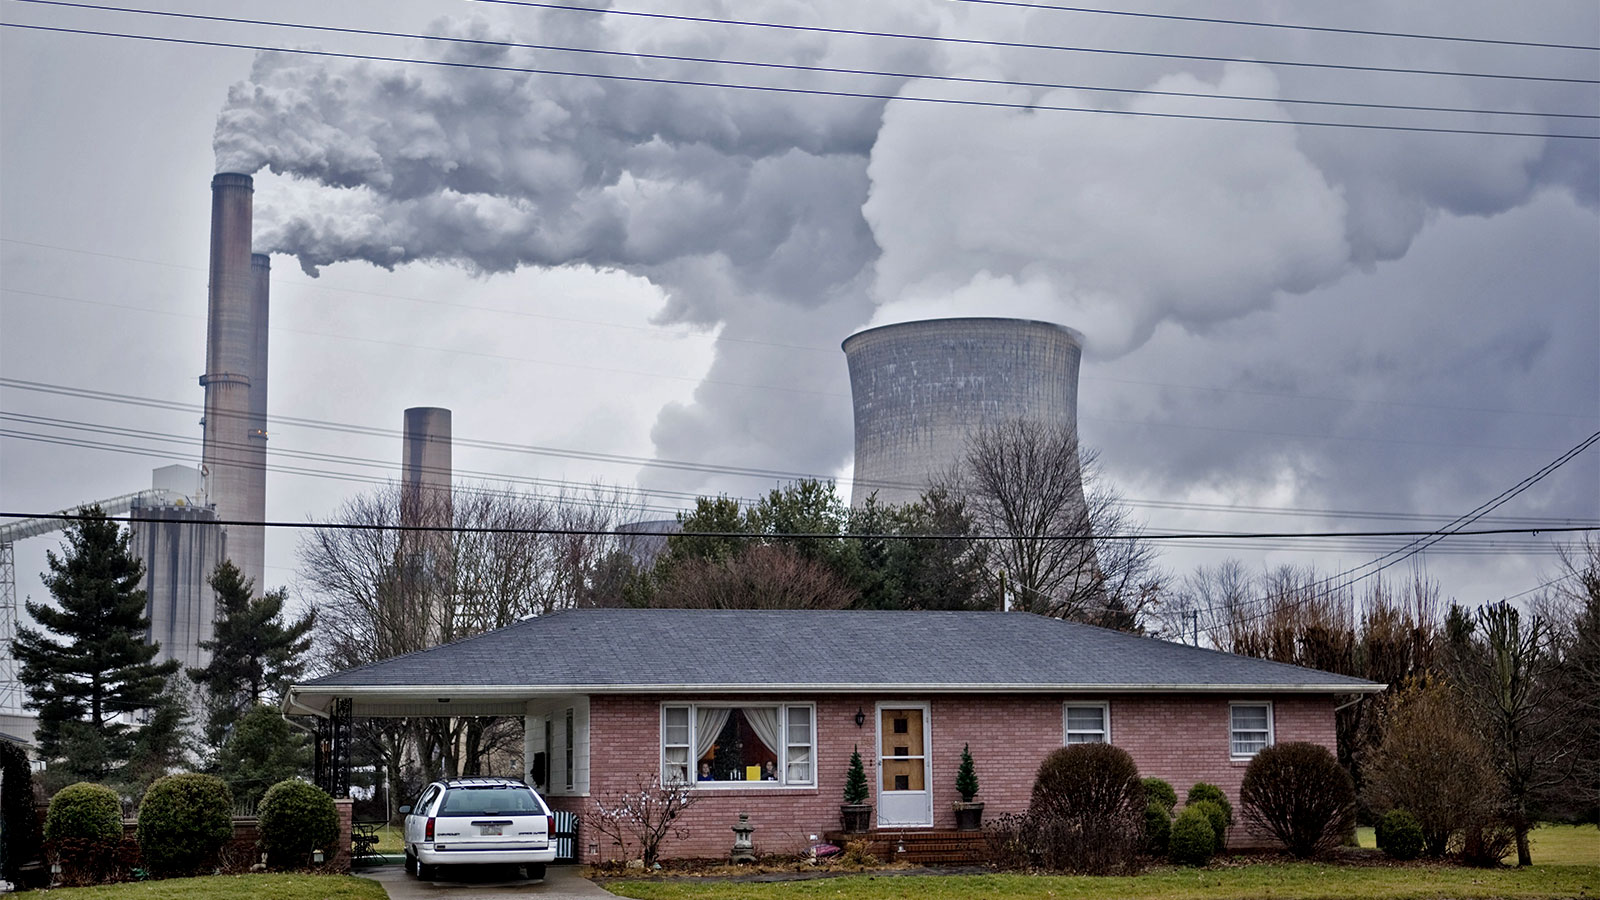 The stacks from the Gavin coal burning power plant dwarf a small nearby home in Cheshire, Ohio